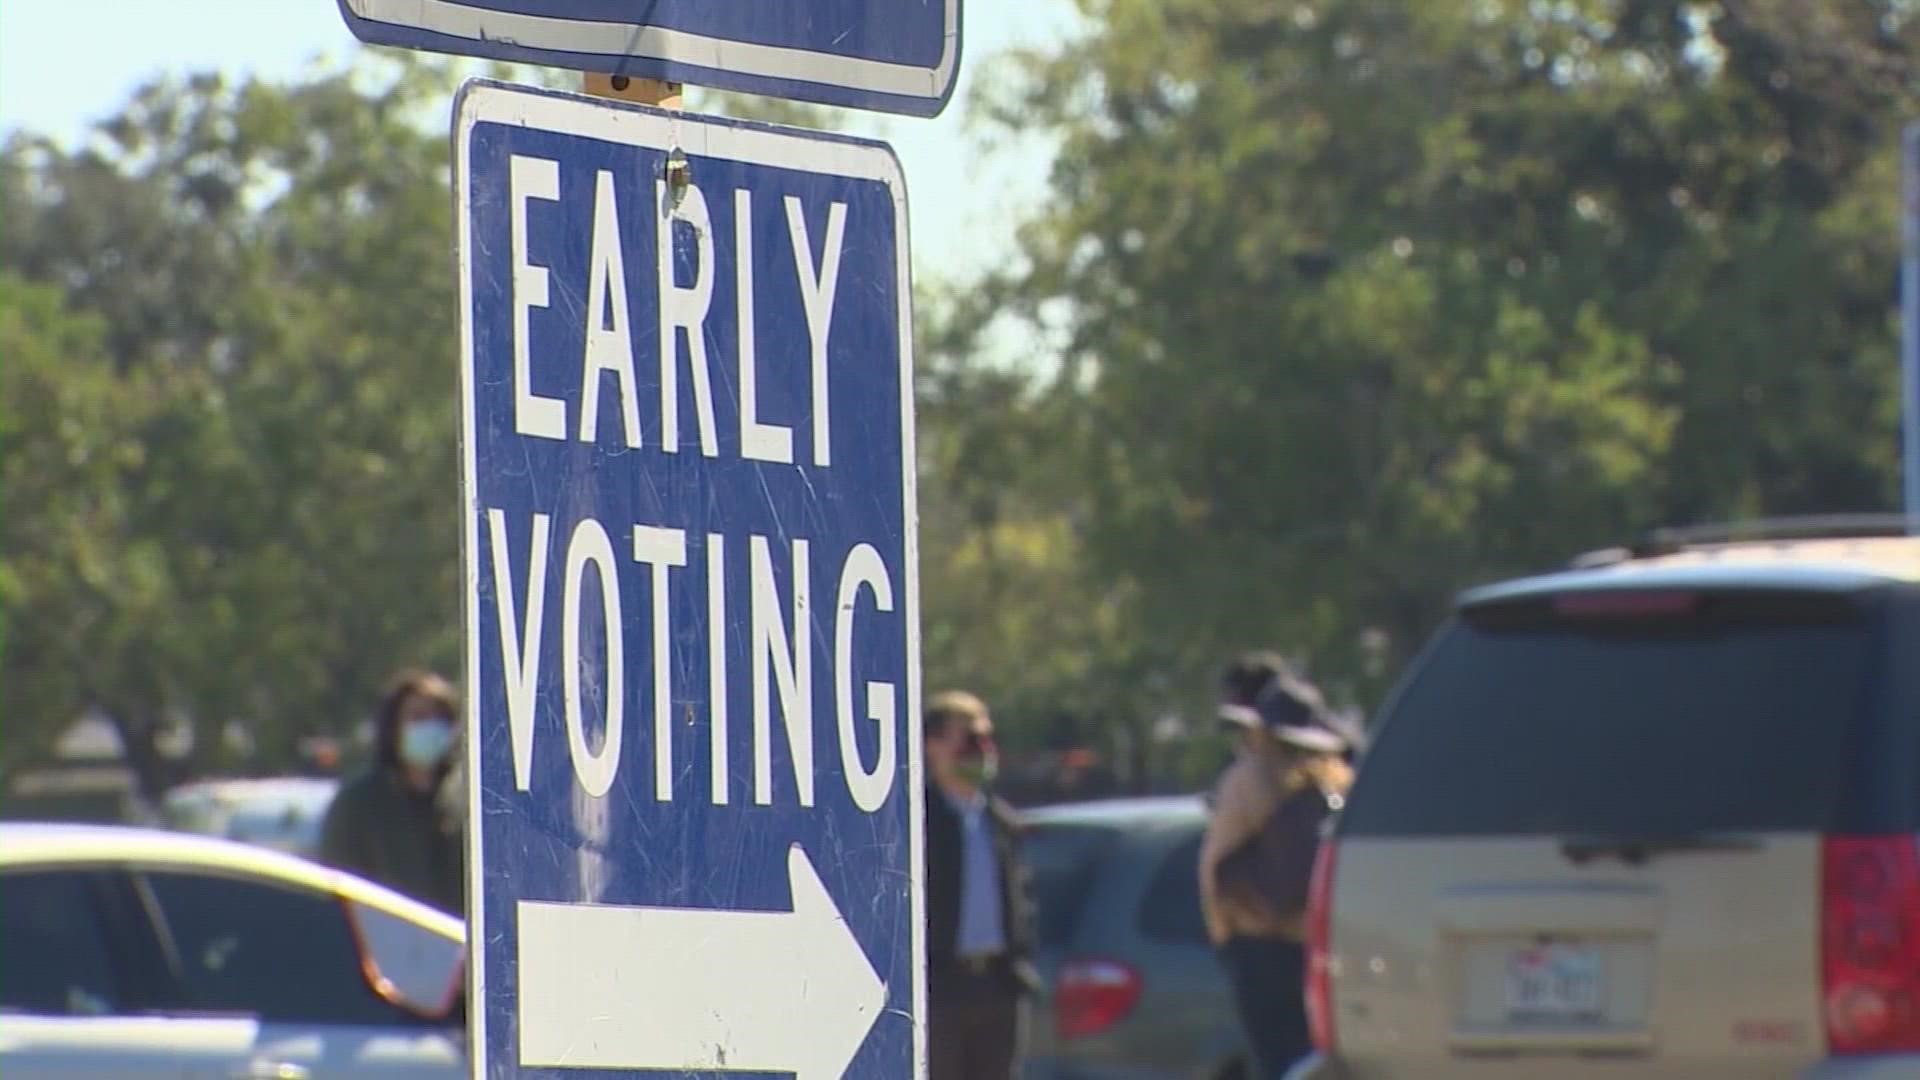 On the eve of early voting, Harris County Elections Administrator Isabel Longoria said there are a number of factors that make 2022’s March primary election unique.